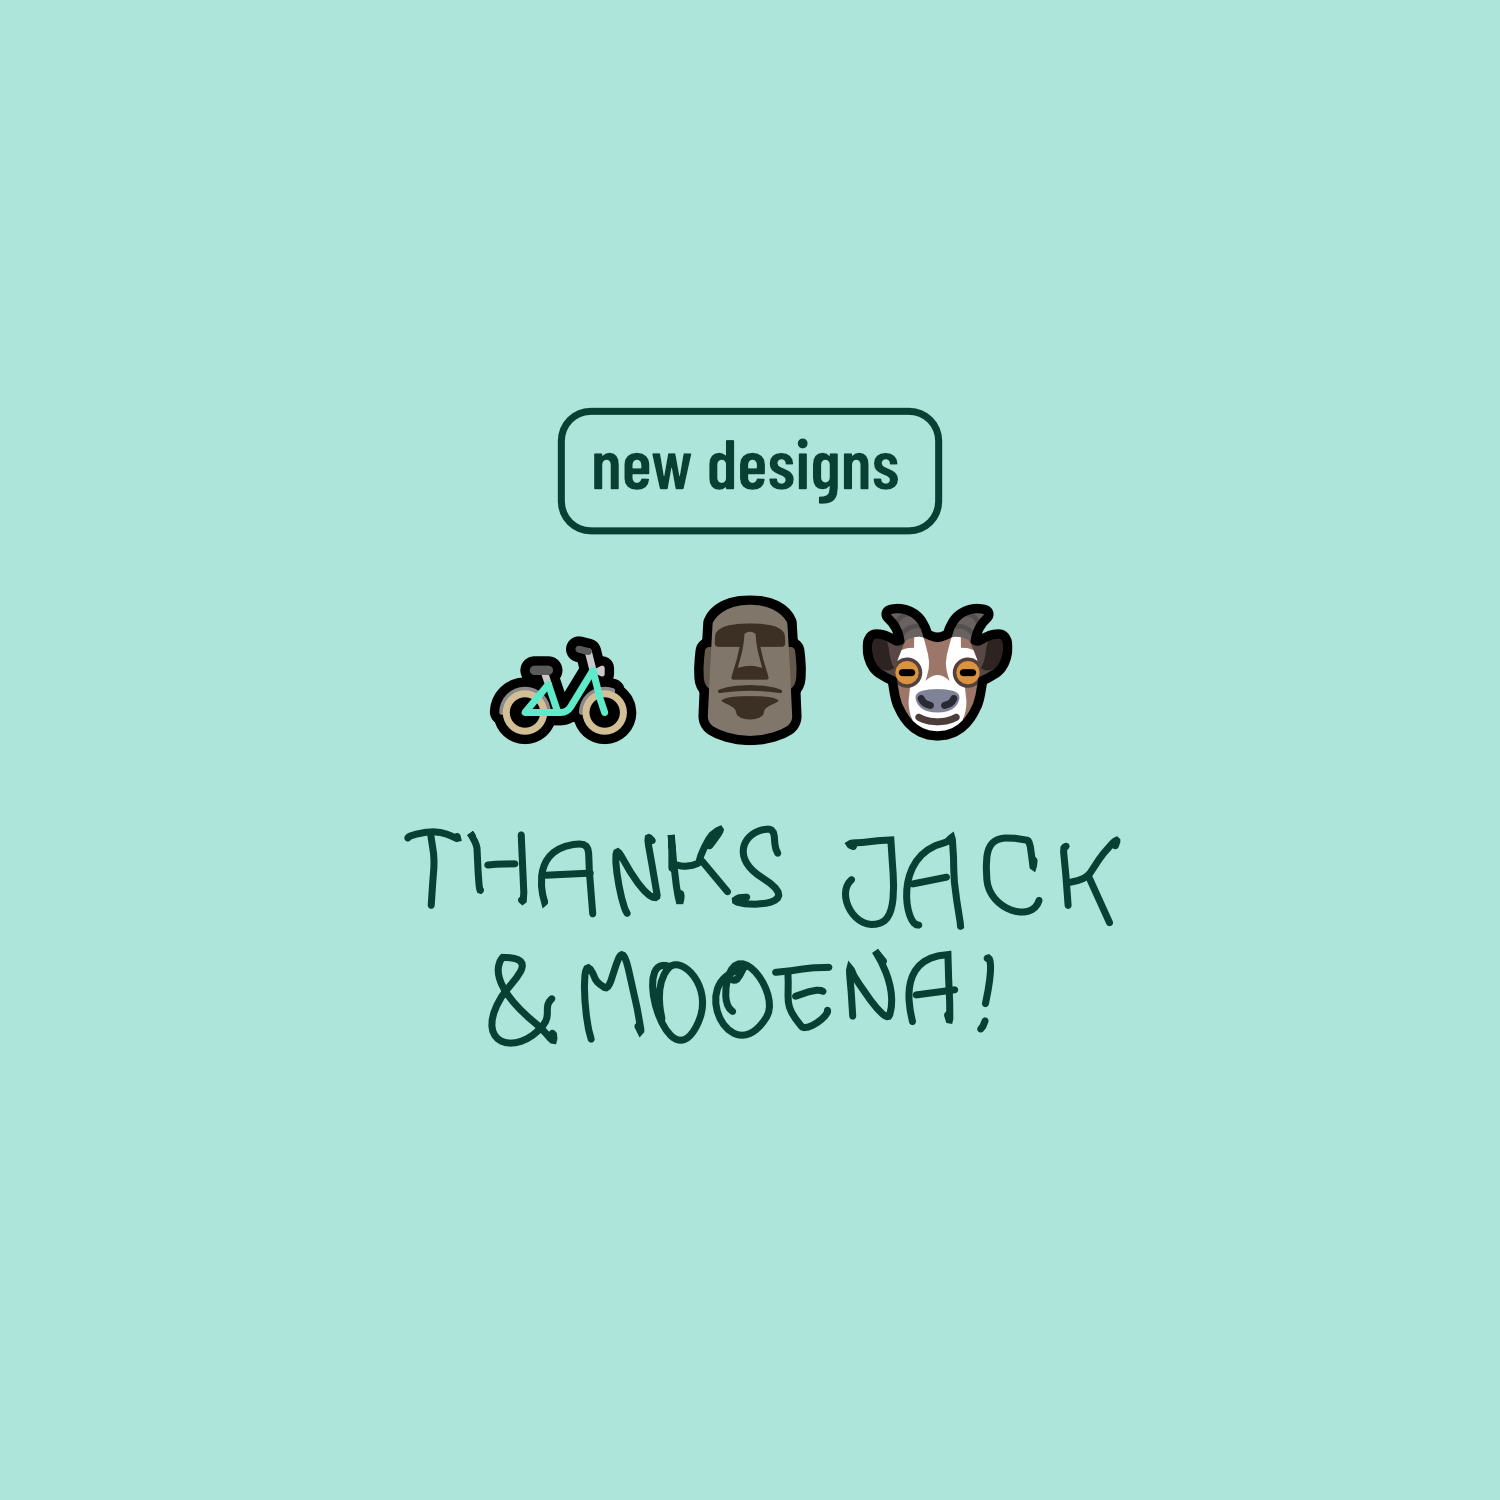 A mint green background with the text "new designs" in a rectangular box at the top. Below the text, there are three icons: a bicycle, an Easter Island statue head, and a cow. Under these icons, the text reads "THANKS JACK & MOOENA!" in a handwritten style.
